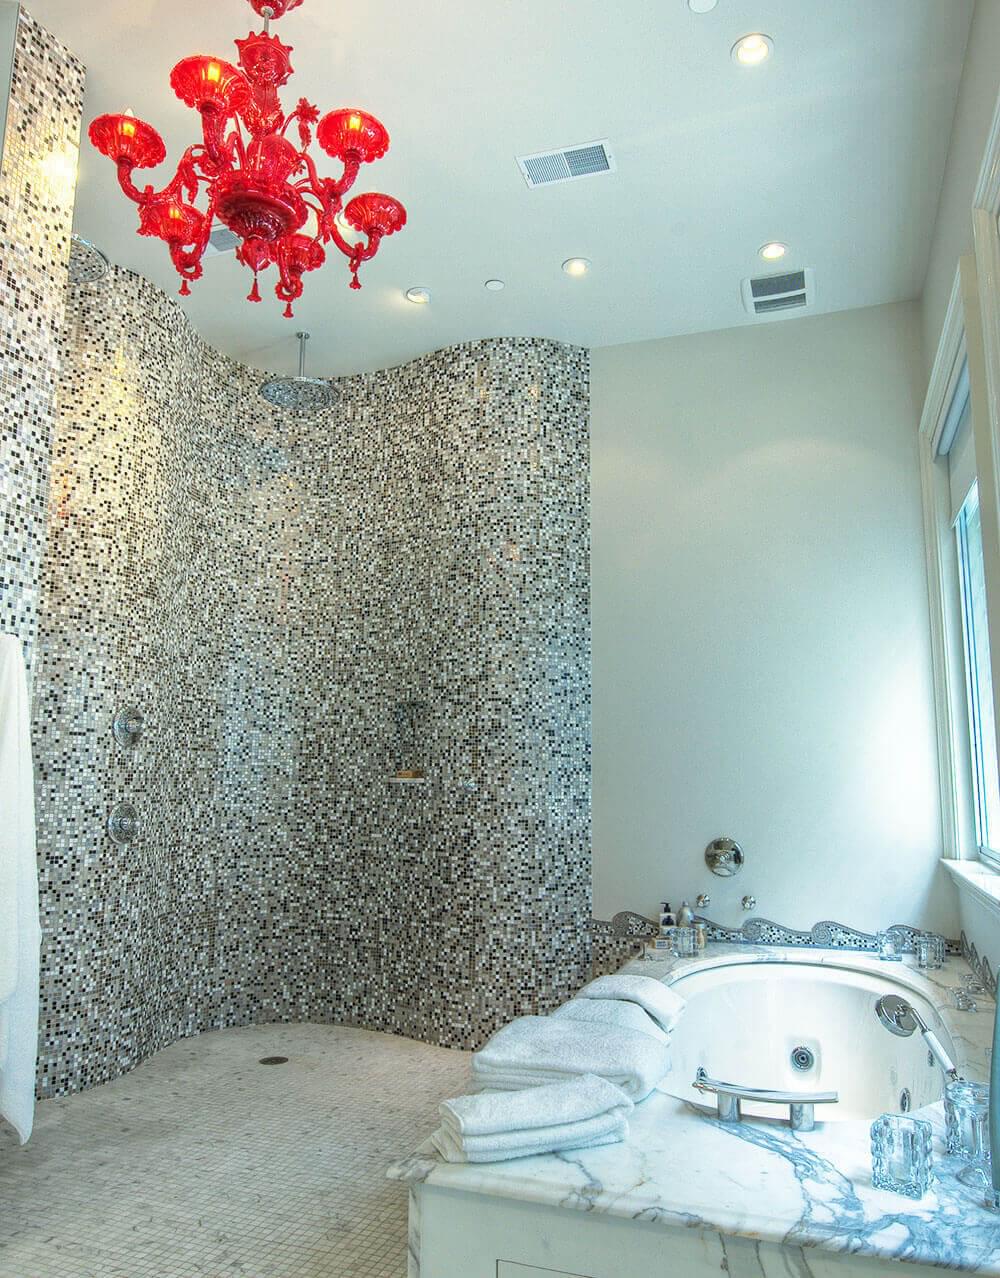 Marble shower and bathtub with red chandelier